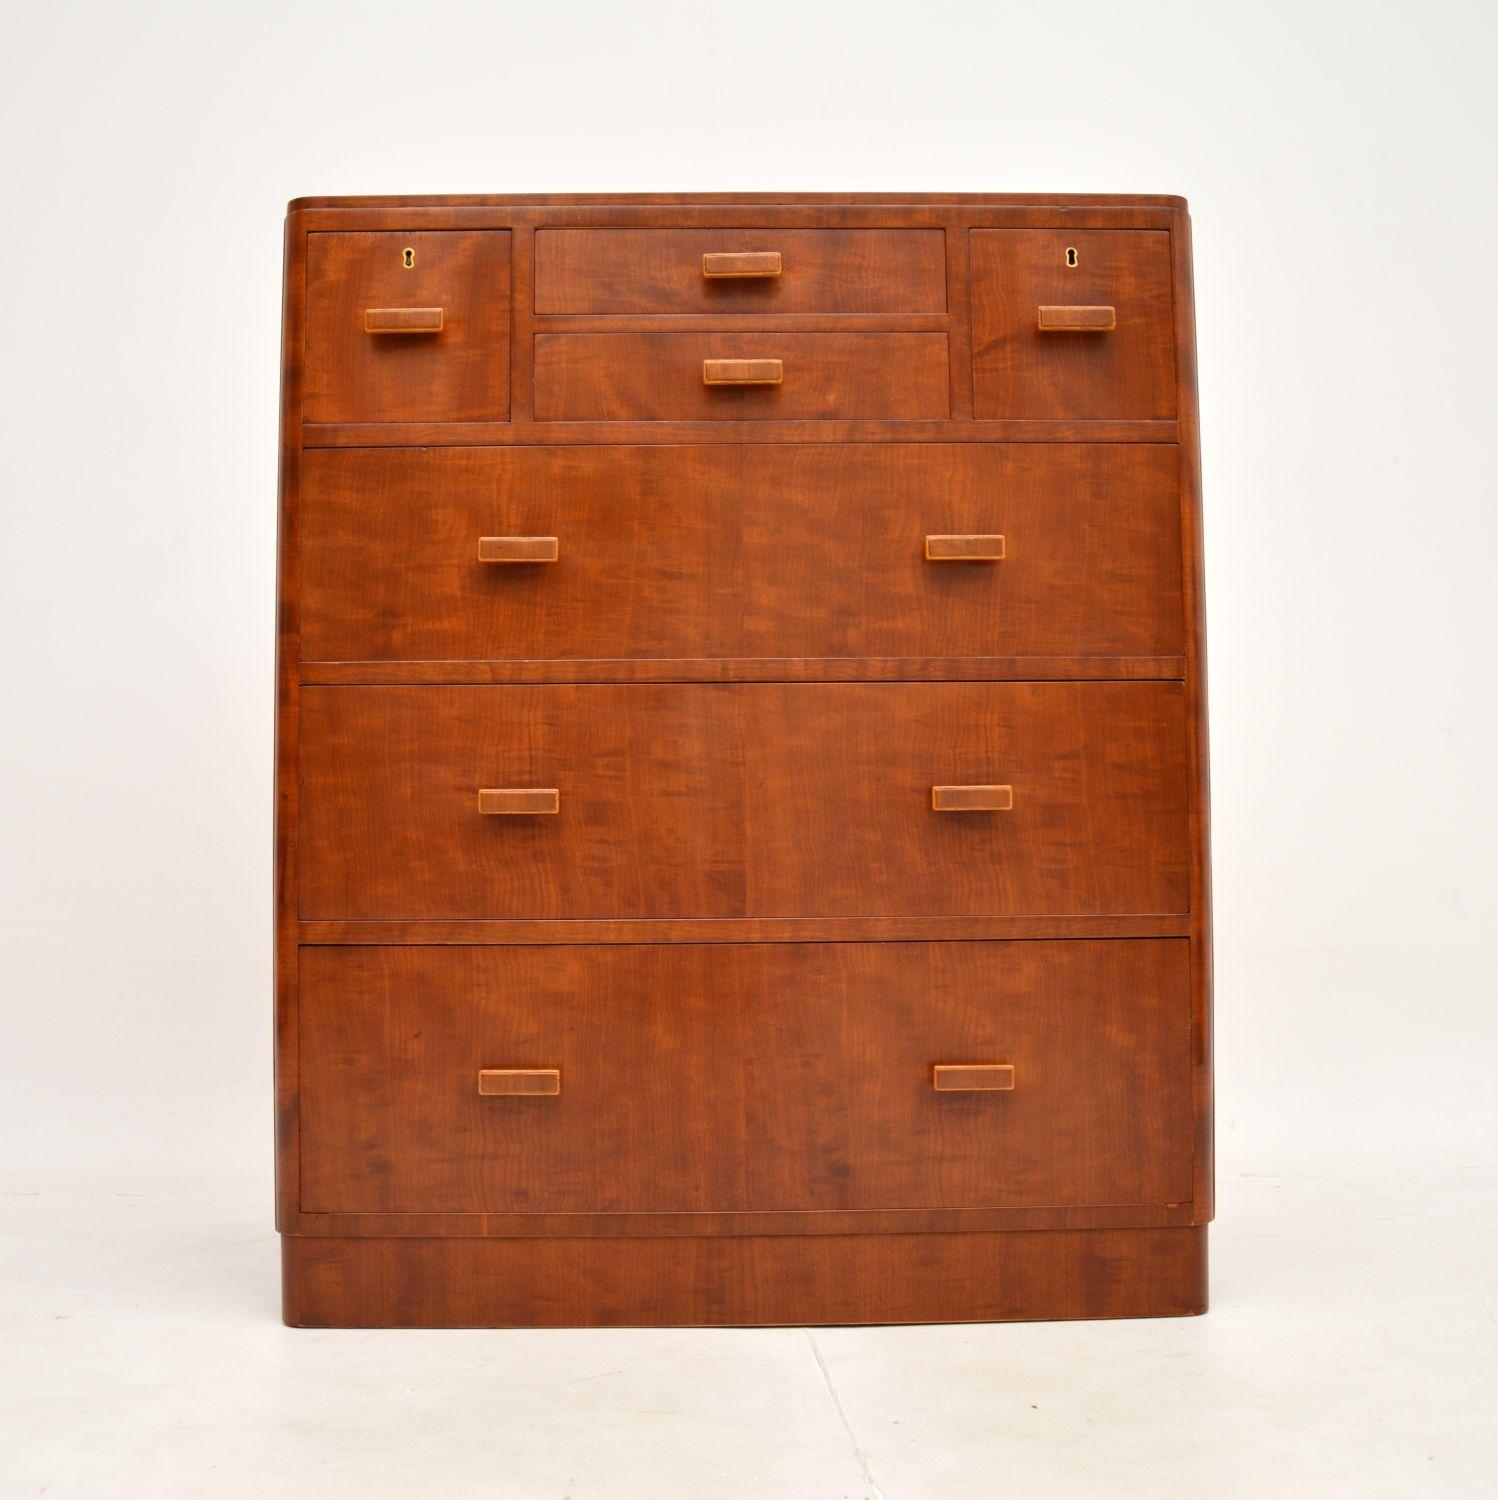 A fantastic Art Deco walnut chest of drawers by Heal’s. This was made in England, it dates from the 1920-30’s.

The quality is outstanding, this is beautifully made with walnut veneers. There is lots of storage space inside, with an interesting